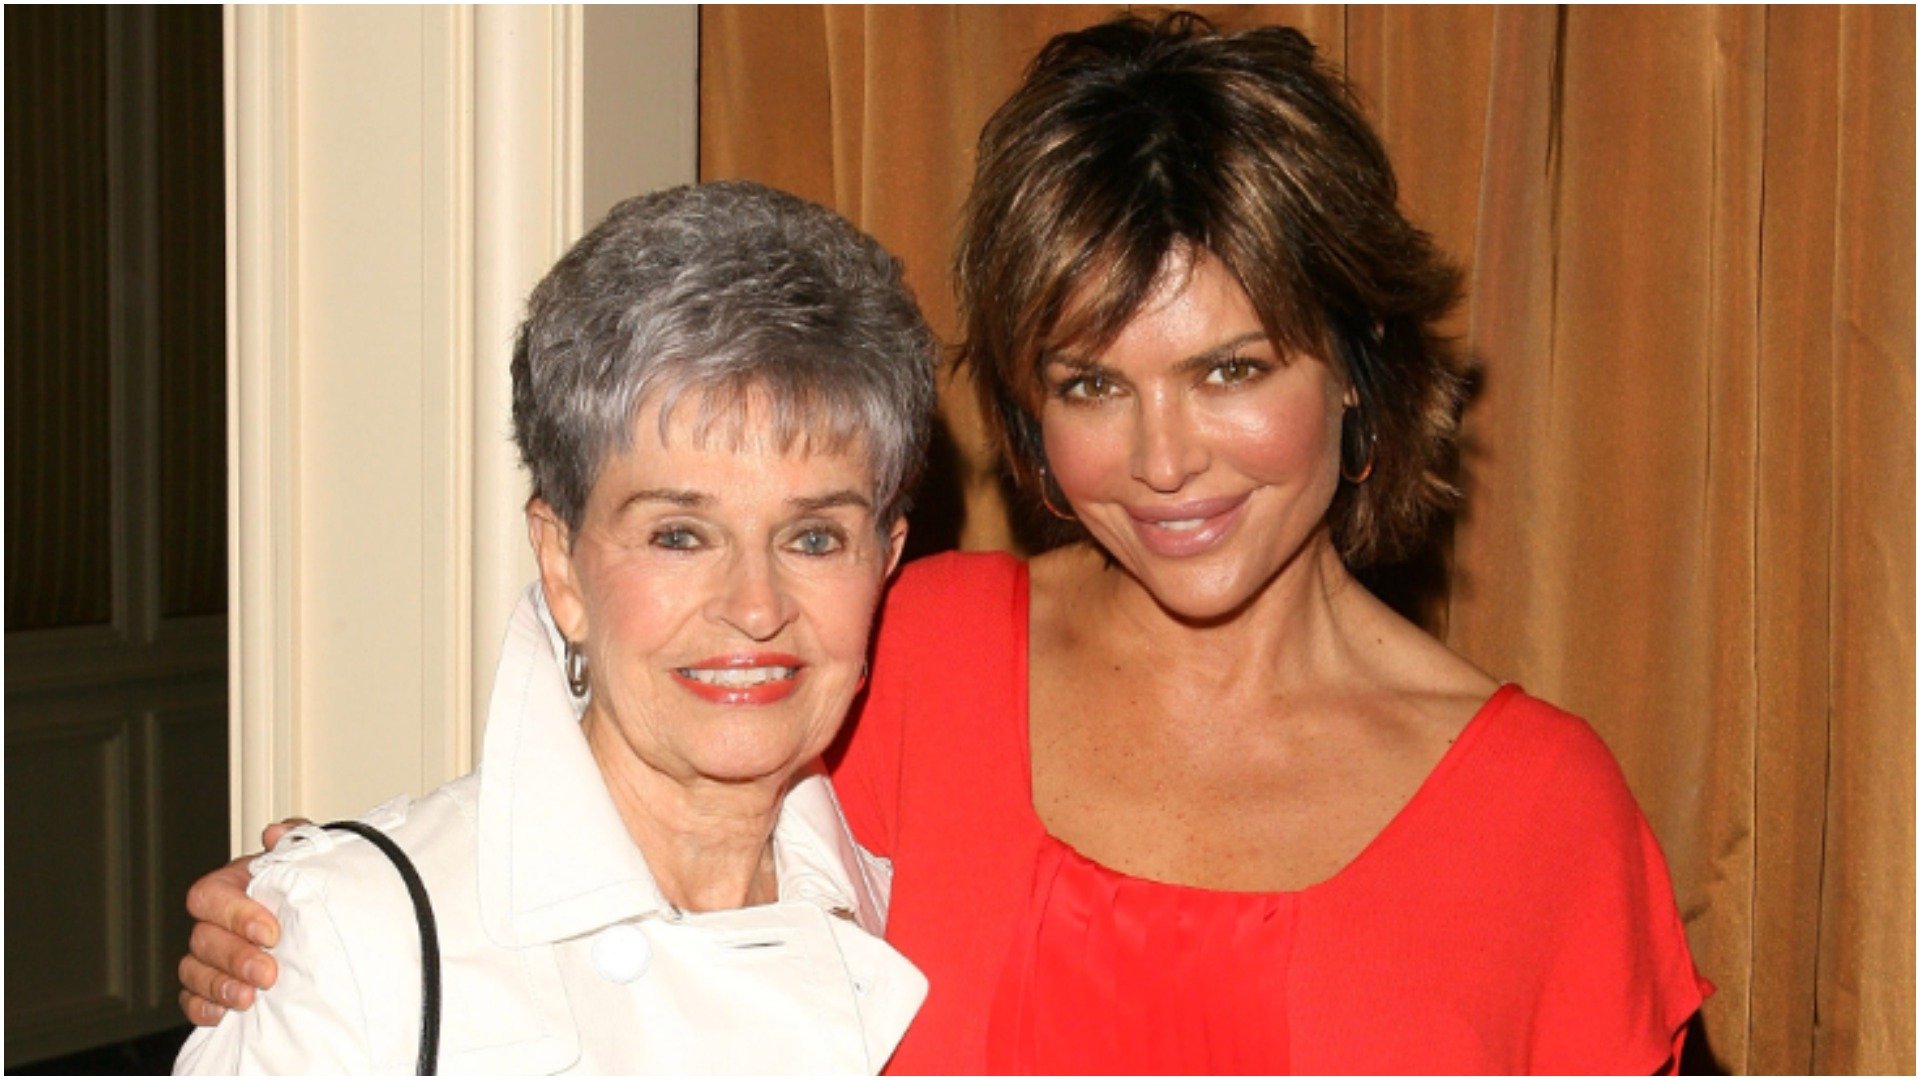 Lisa Rinna from RHOBH discusses her mother's stroke